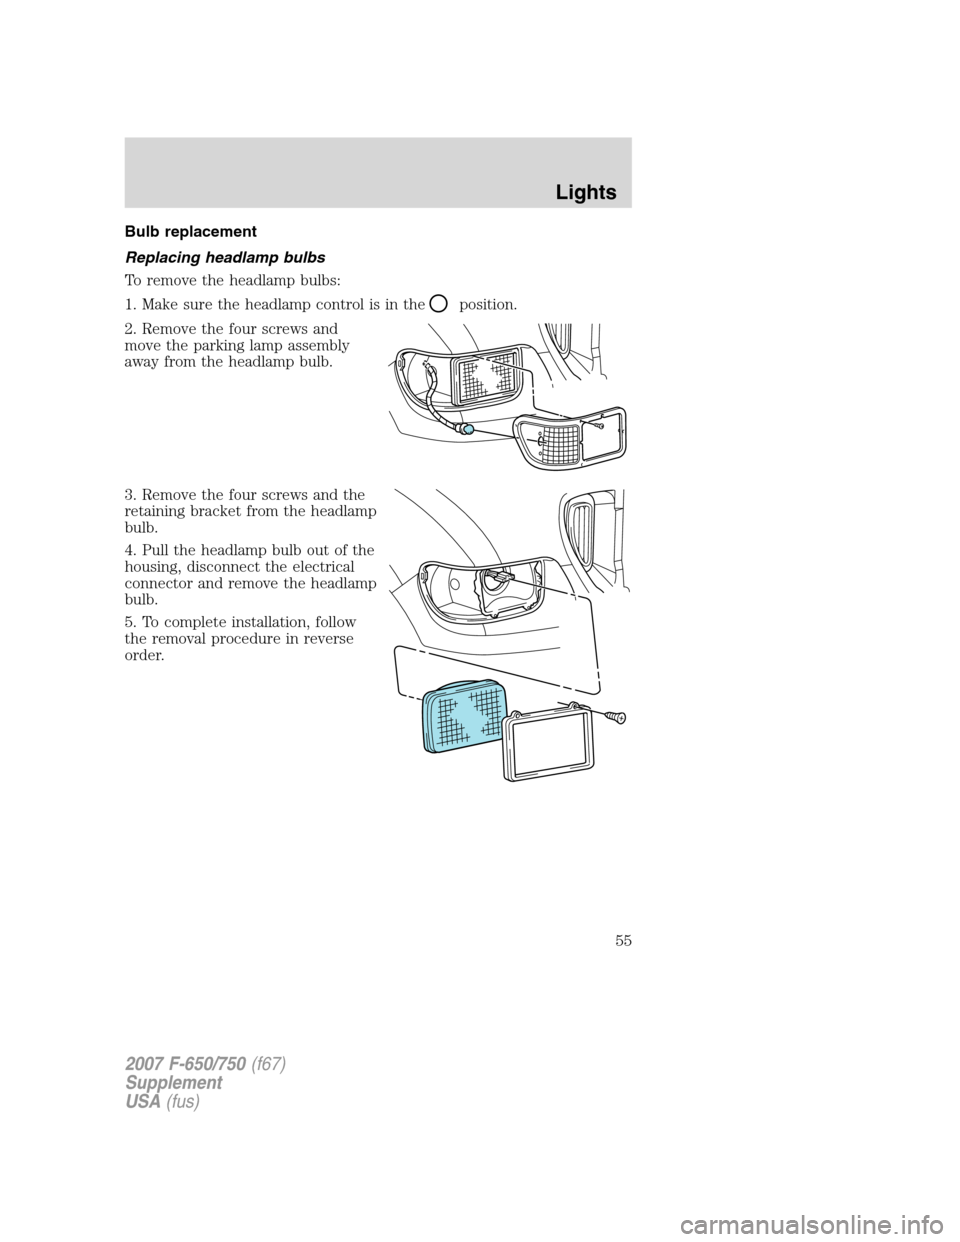 FORD F750 2007 11.G Owners Manual Bulb replacement
Replacing headlamp bulbs
To remove the headlamp bulbs:
1. Make sure the headlamp control is in the
position.
2. Remove the four screws and
move the parking lamp assembly
away from the